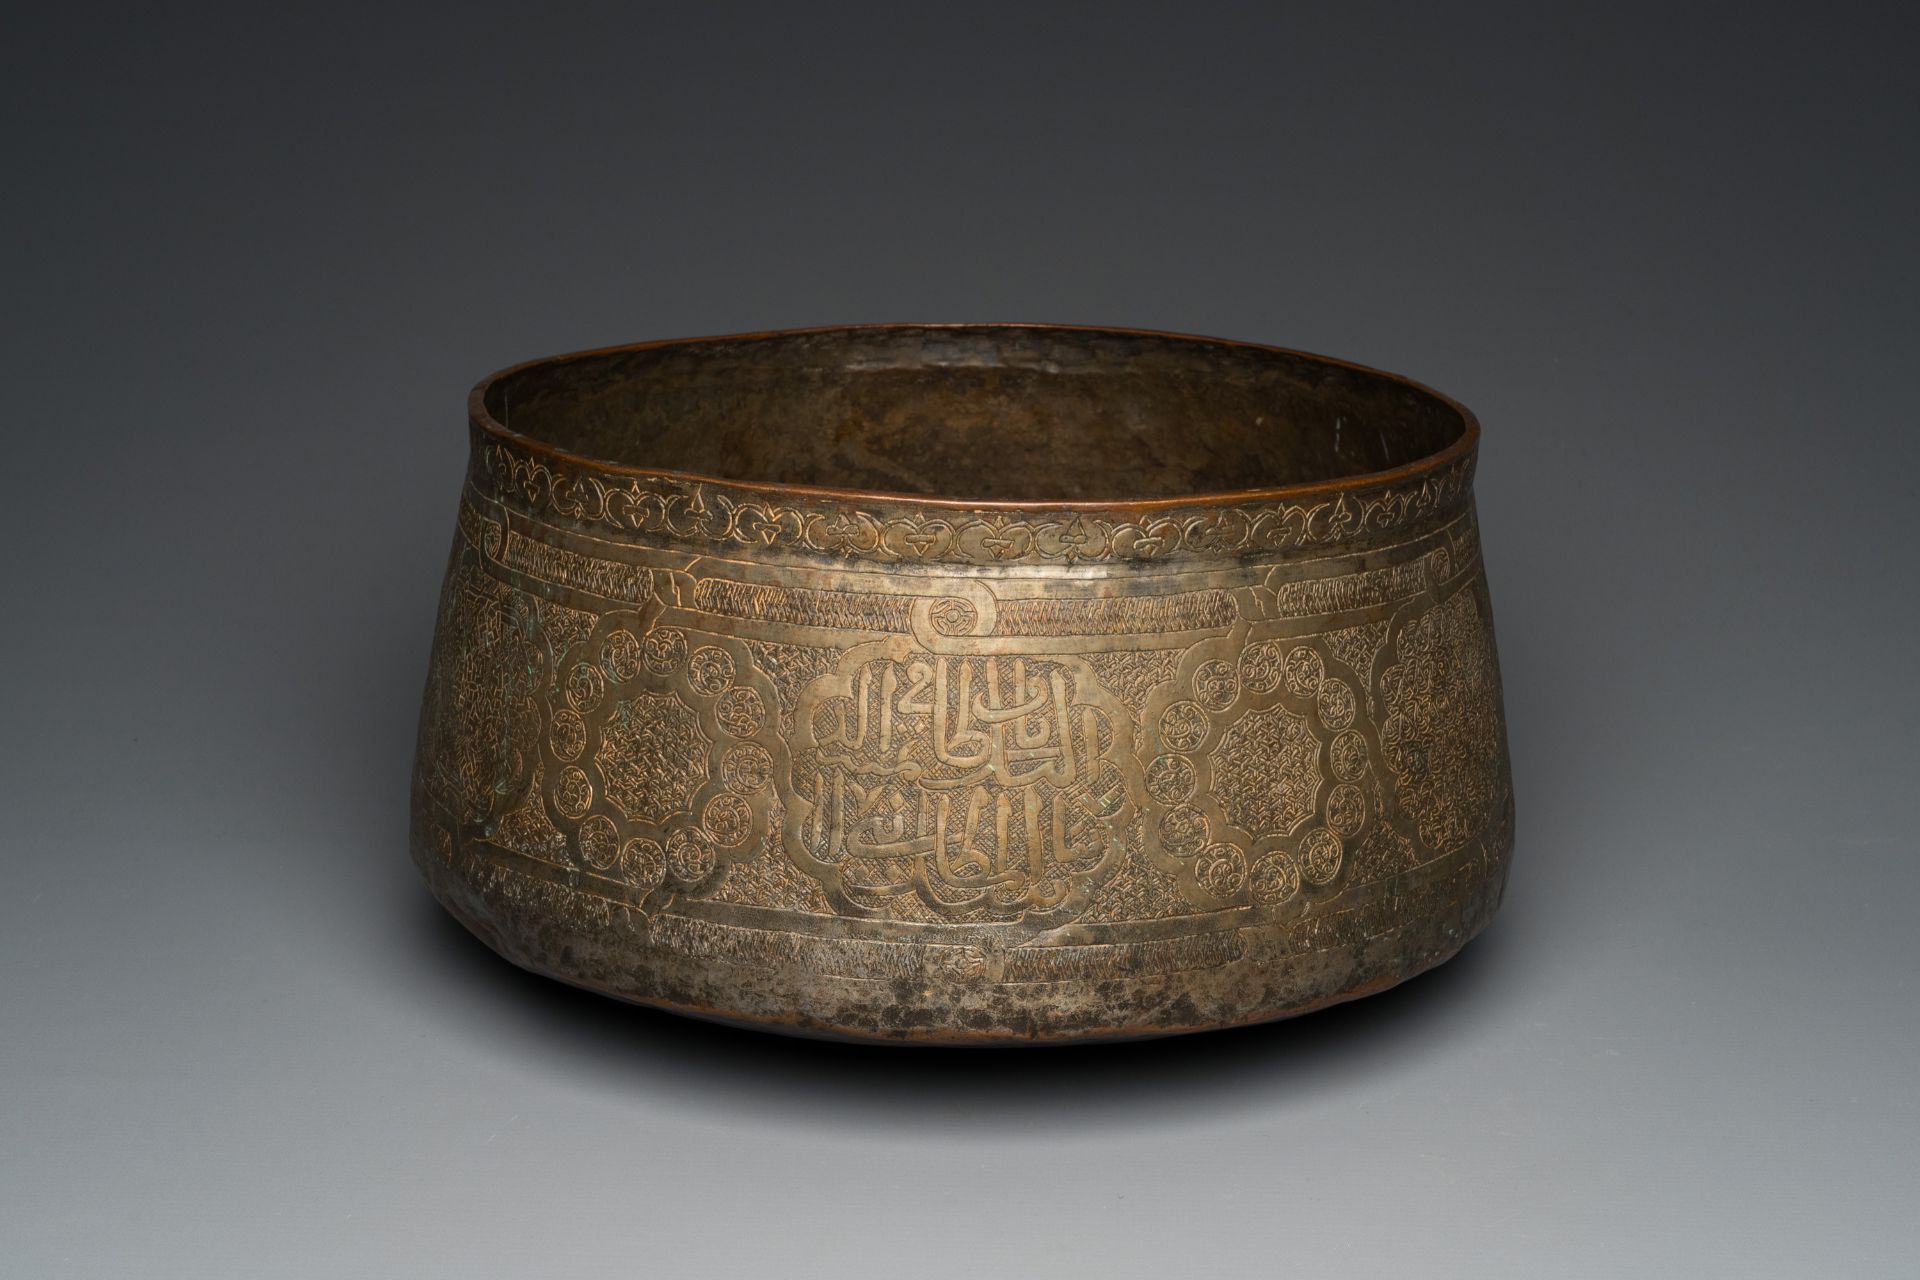 A large Islamic engraved bronze basin with calligraphic design, probably Egypt, 18/19th C. - Image 6 of 8